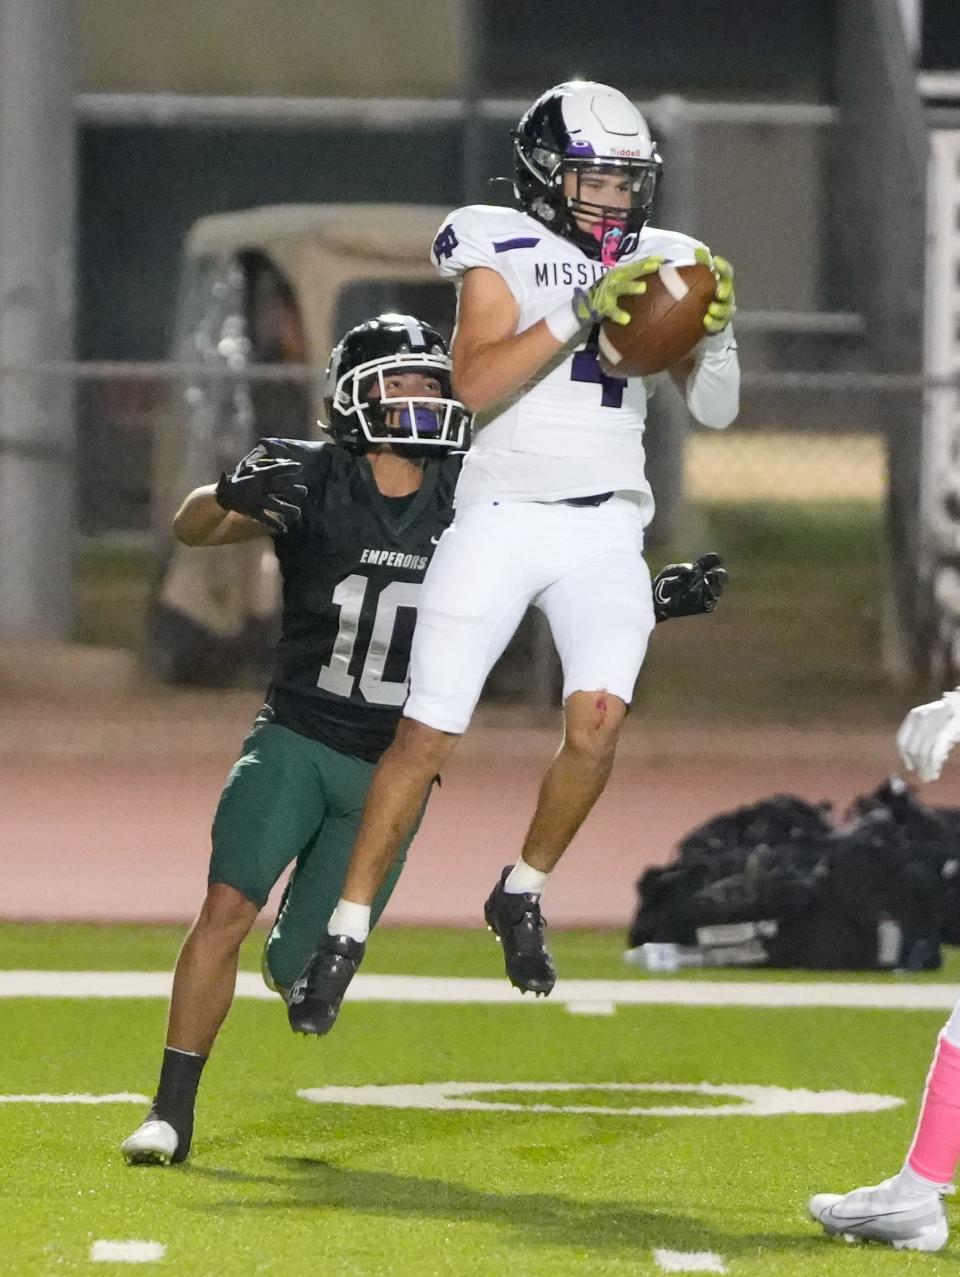 Mission Oak's Cameron Azevedo makes the interception of a pass intended for Dinuba's Christian Lopez late in the game on Friday in Dinuba.